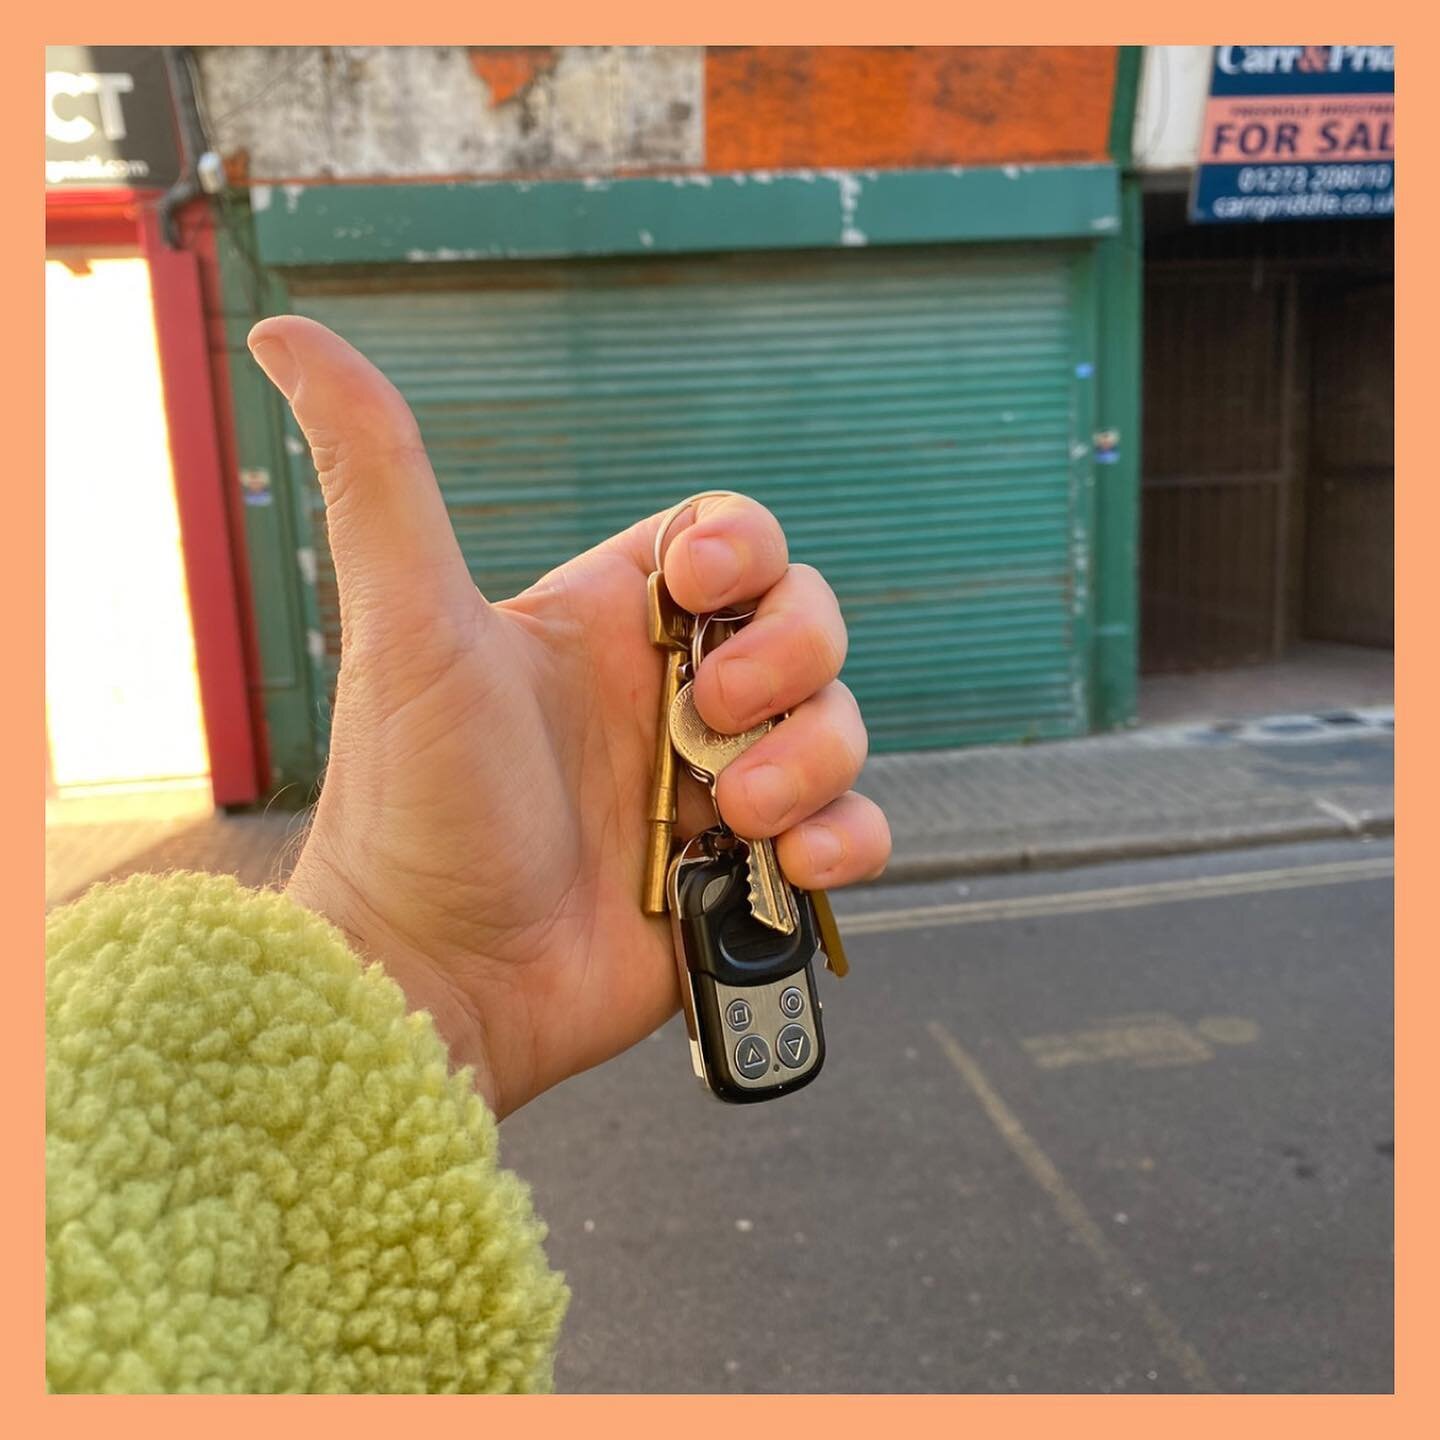 One year since getting the keys! 🔑 Watch the &lsquo;Refurb&rsquo; highlight in the bio to see the whole process/ordeal from start to finish ✌🏻🛸